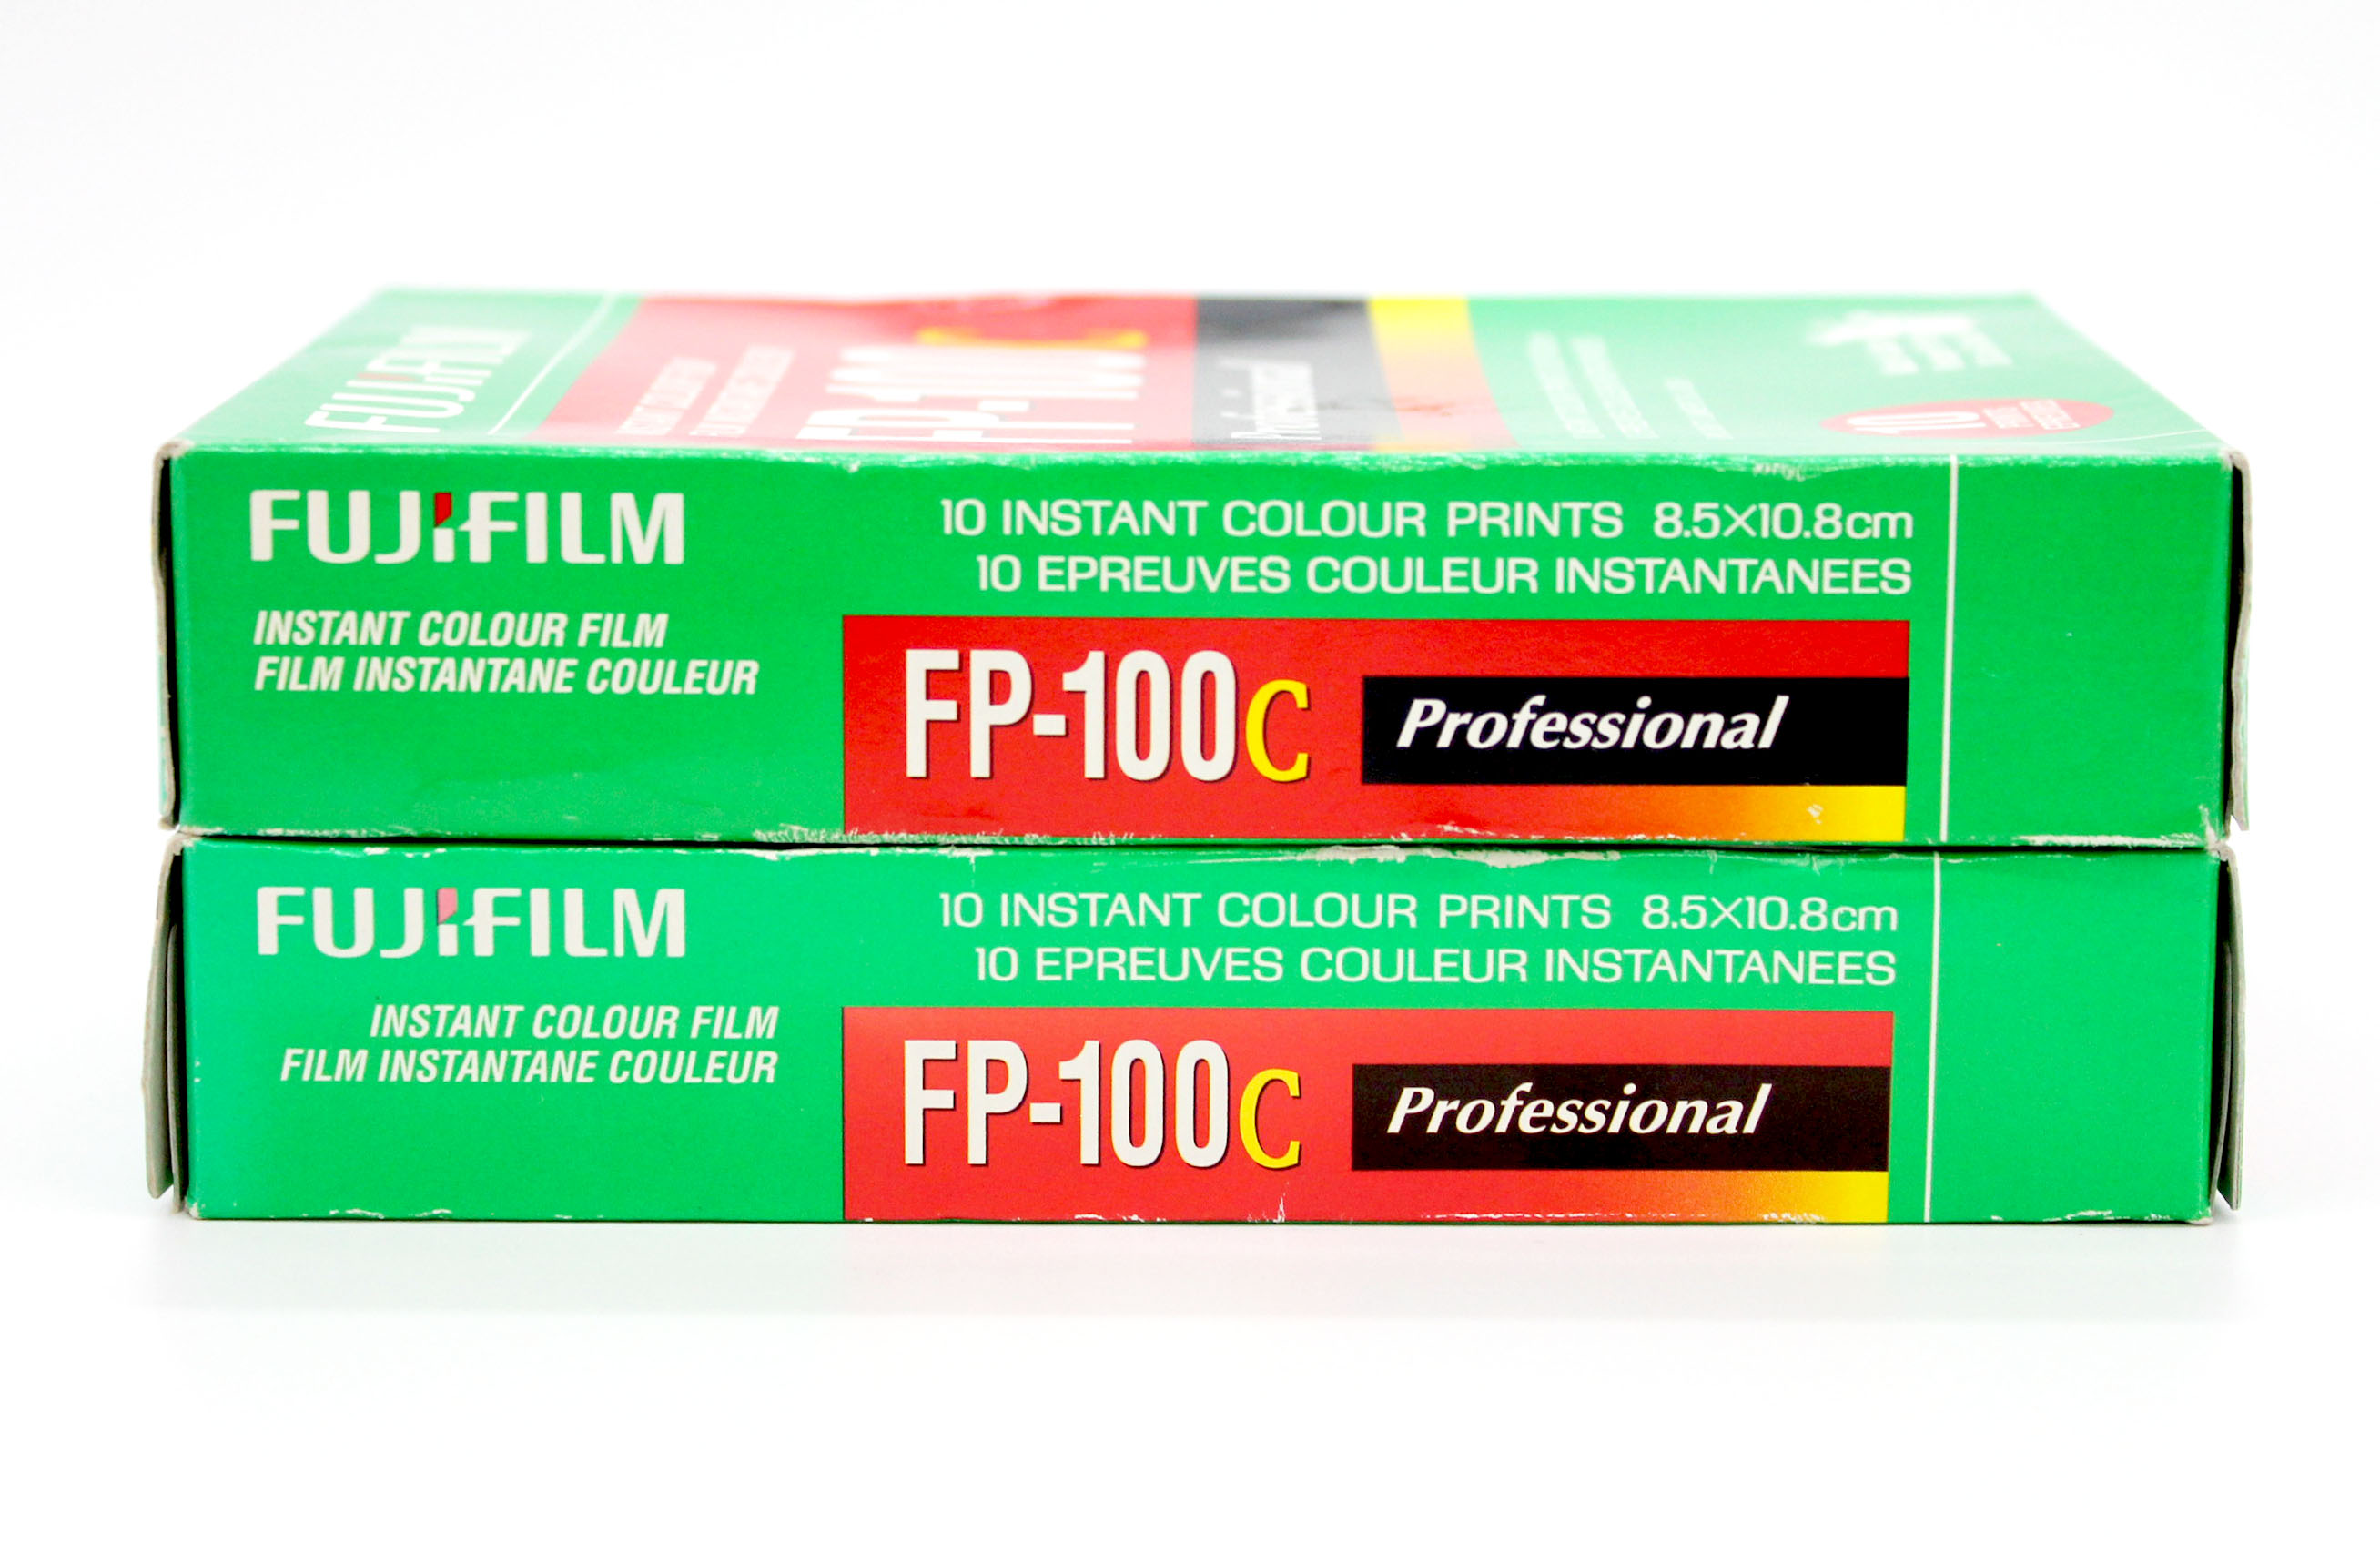  Fujifilm FP-100C Instant Color Film Set of 2 (Expired) from Japan Photo 3